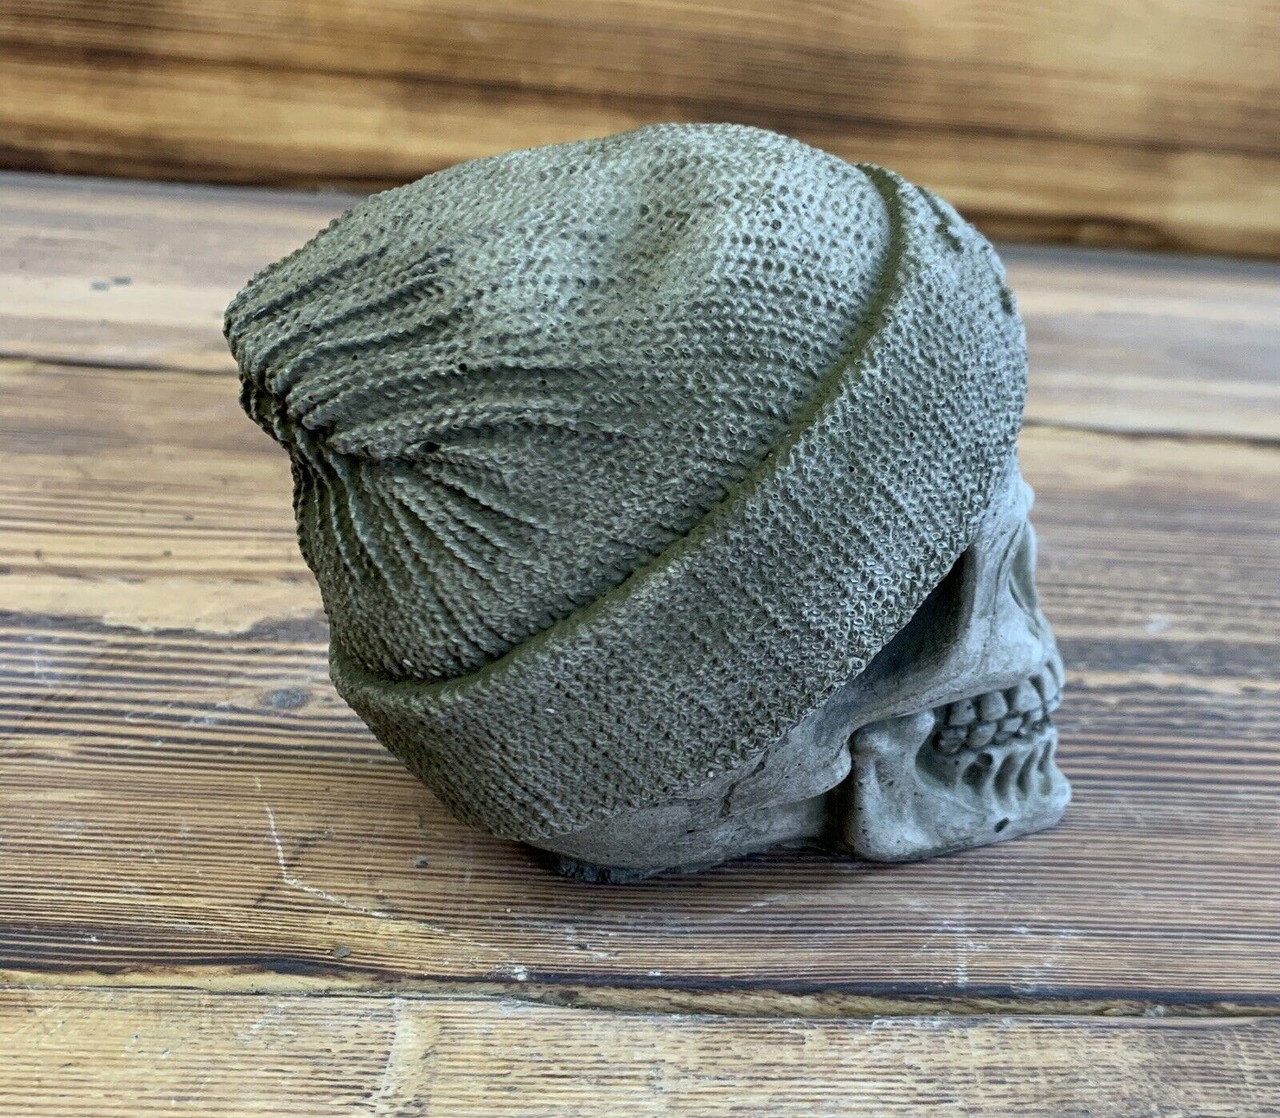 STONE GARDEN WOOLY HAT SKULL GOTHIC HUMAN HEAD ORNAMENT STATUE